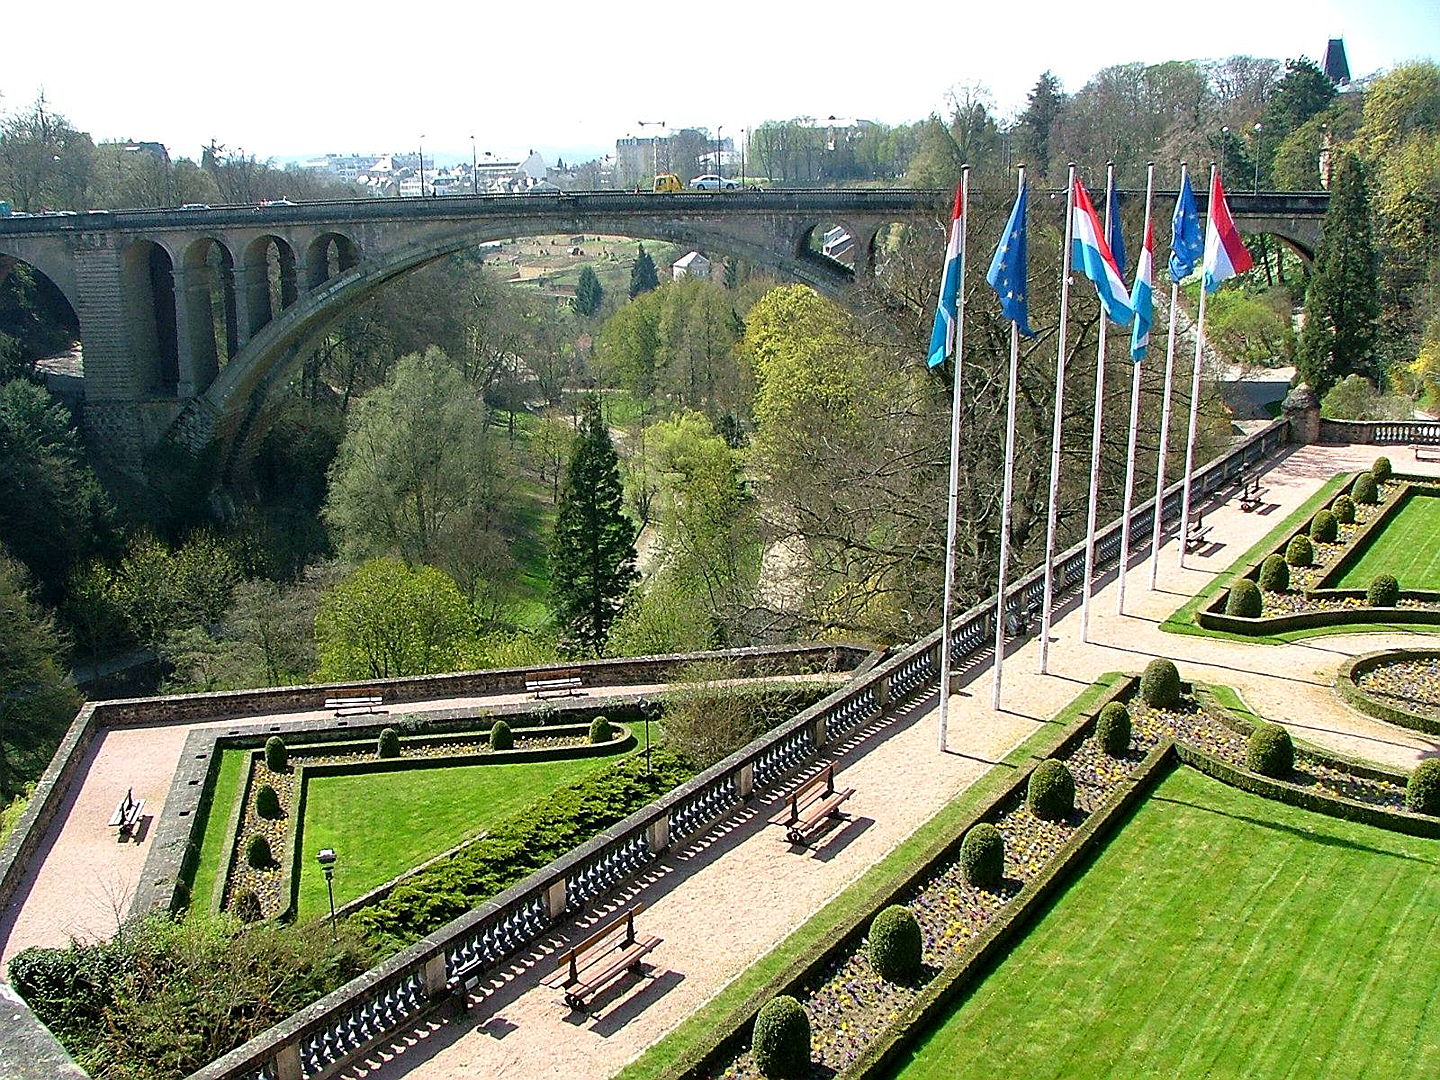  Luxembourg
- luxembourg green city.jpg